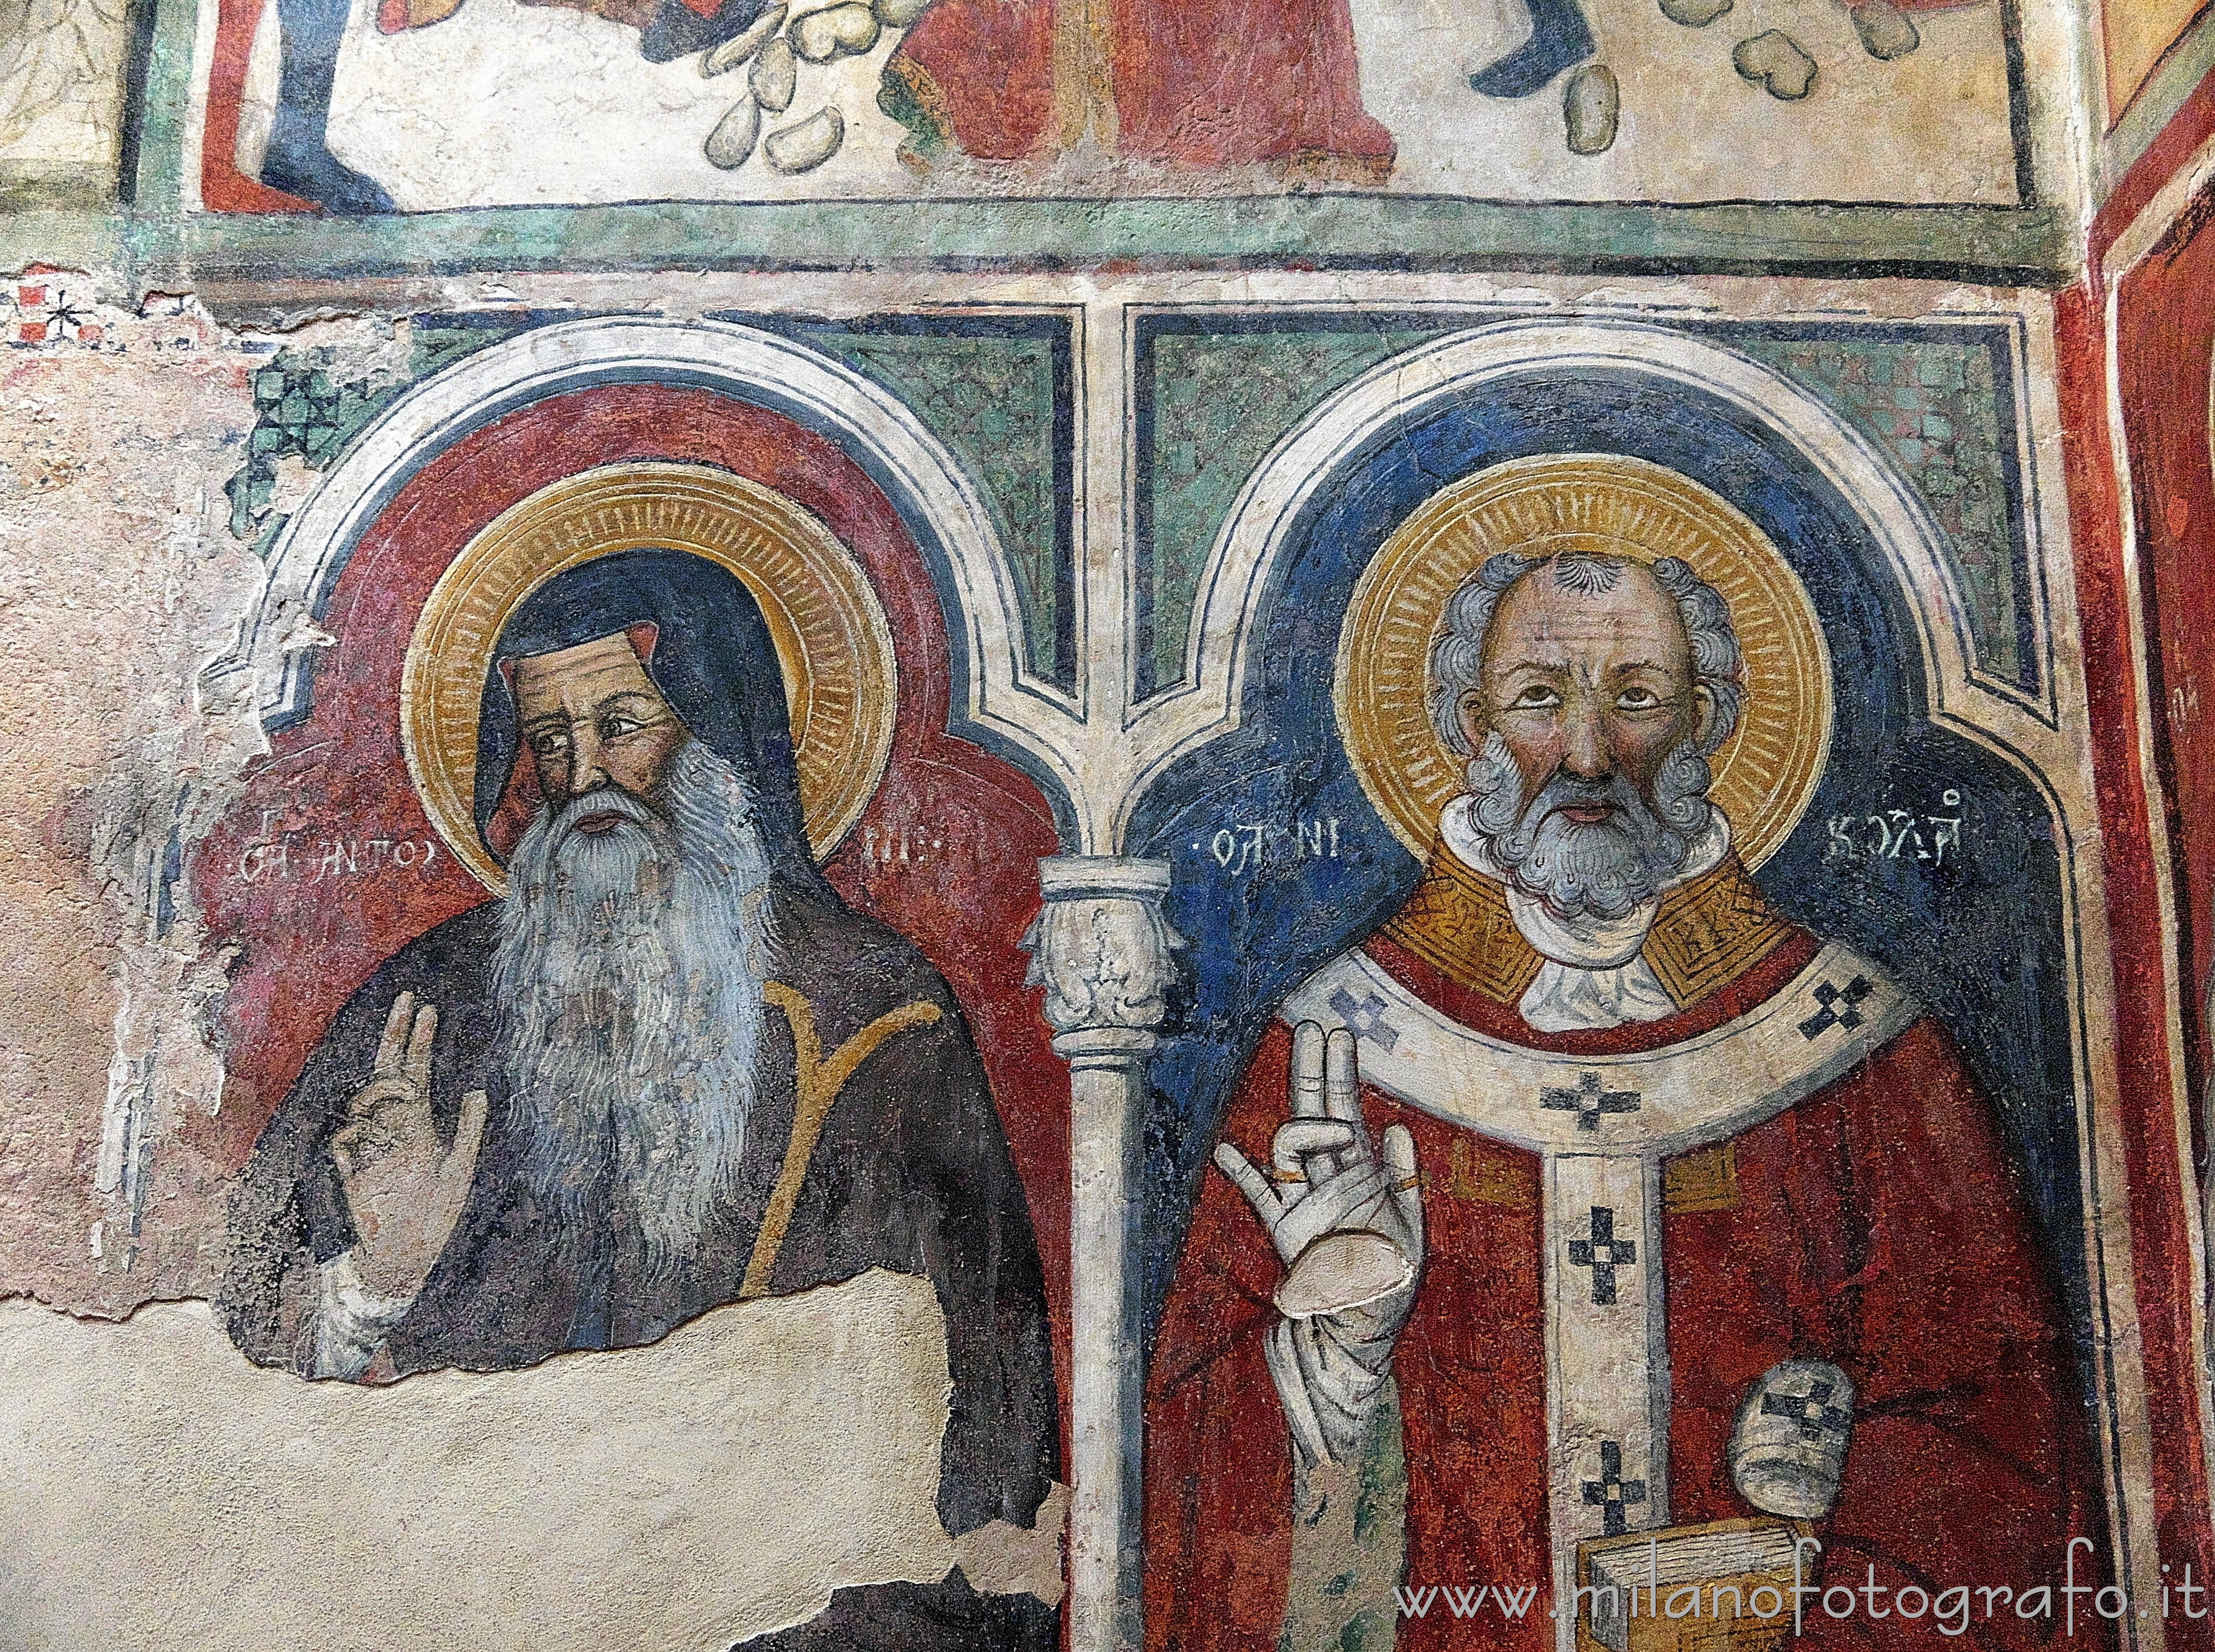 Soleto (Lecce, Italy): Byzantine and catholic priests side by side in the Church of Santo Stefano - Soleto (Lecce, Italy)